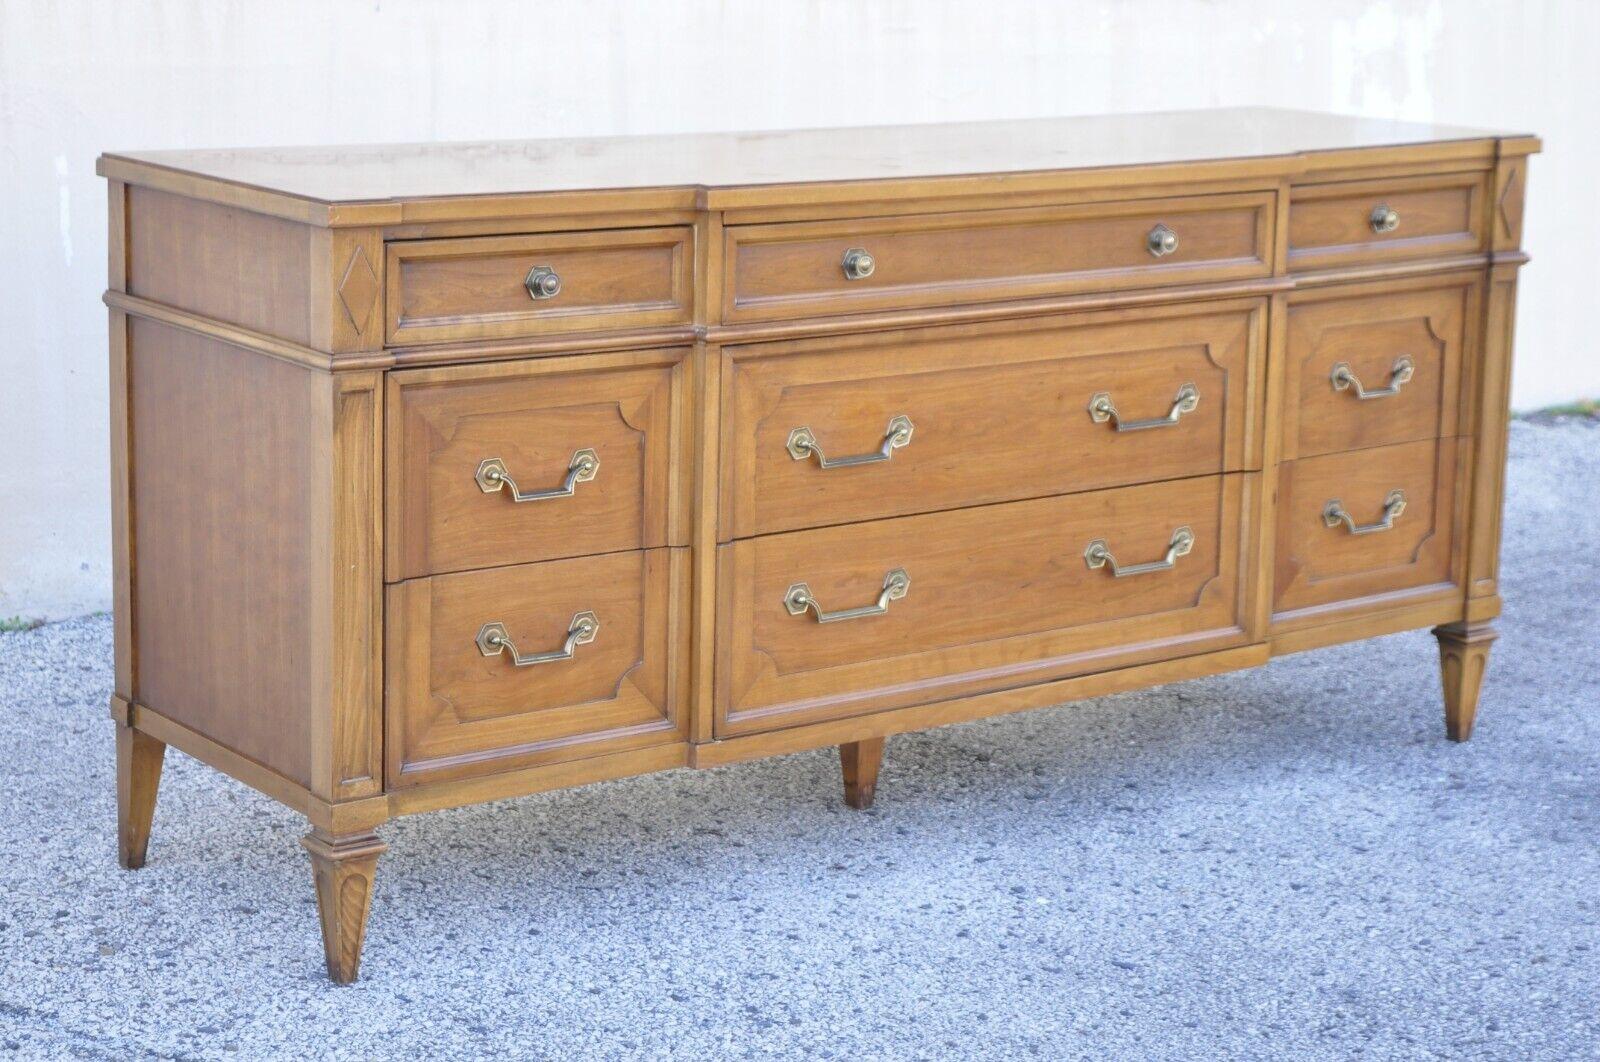 Vintage Thomasville Italian Provincial style walnut 9 drawer triple dresser. Item features beautiful wood grain, original stamp, 9 dovetailed drawers, quality American craftsmanship, great style and form. Circa mid to late 20th century.